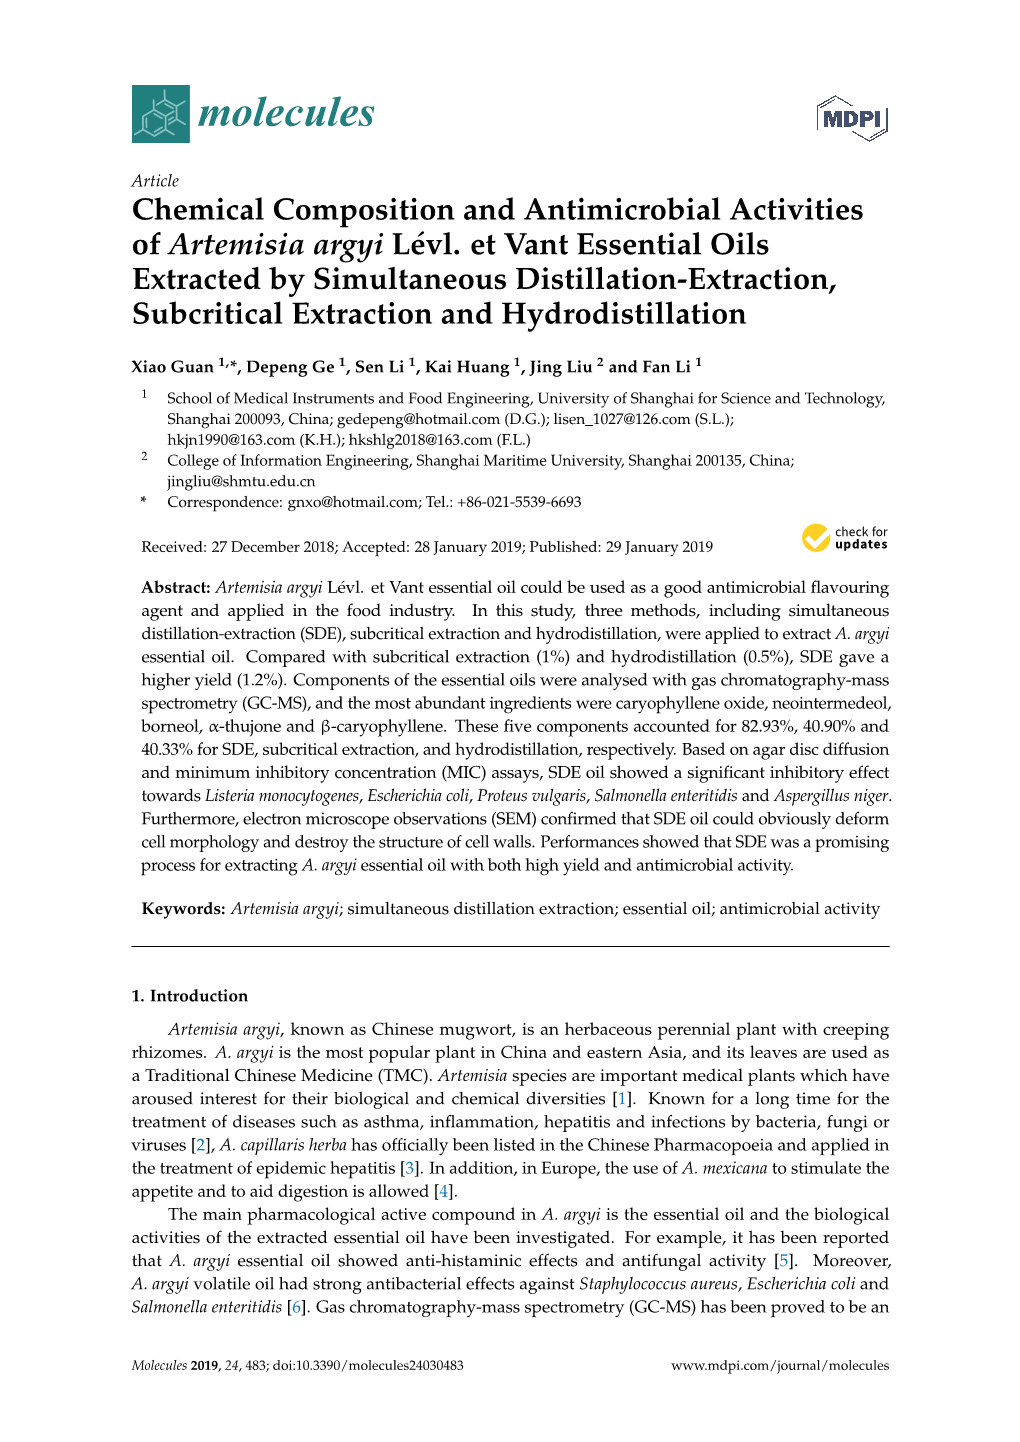 Chemical Composition and Antimicrobial Activities of Artemisia Argyi Lévl